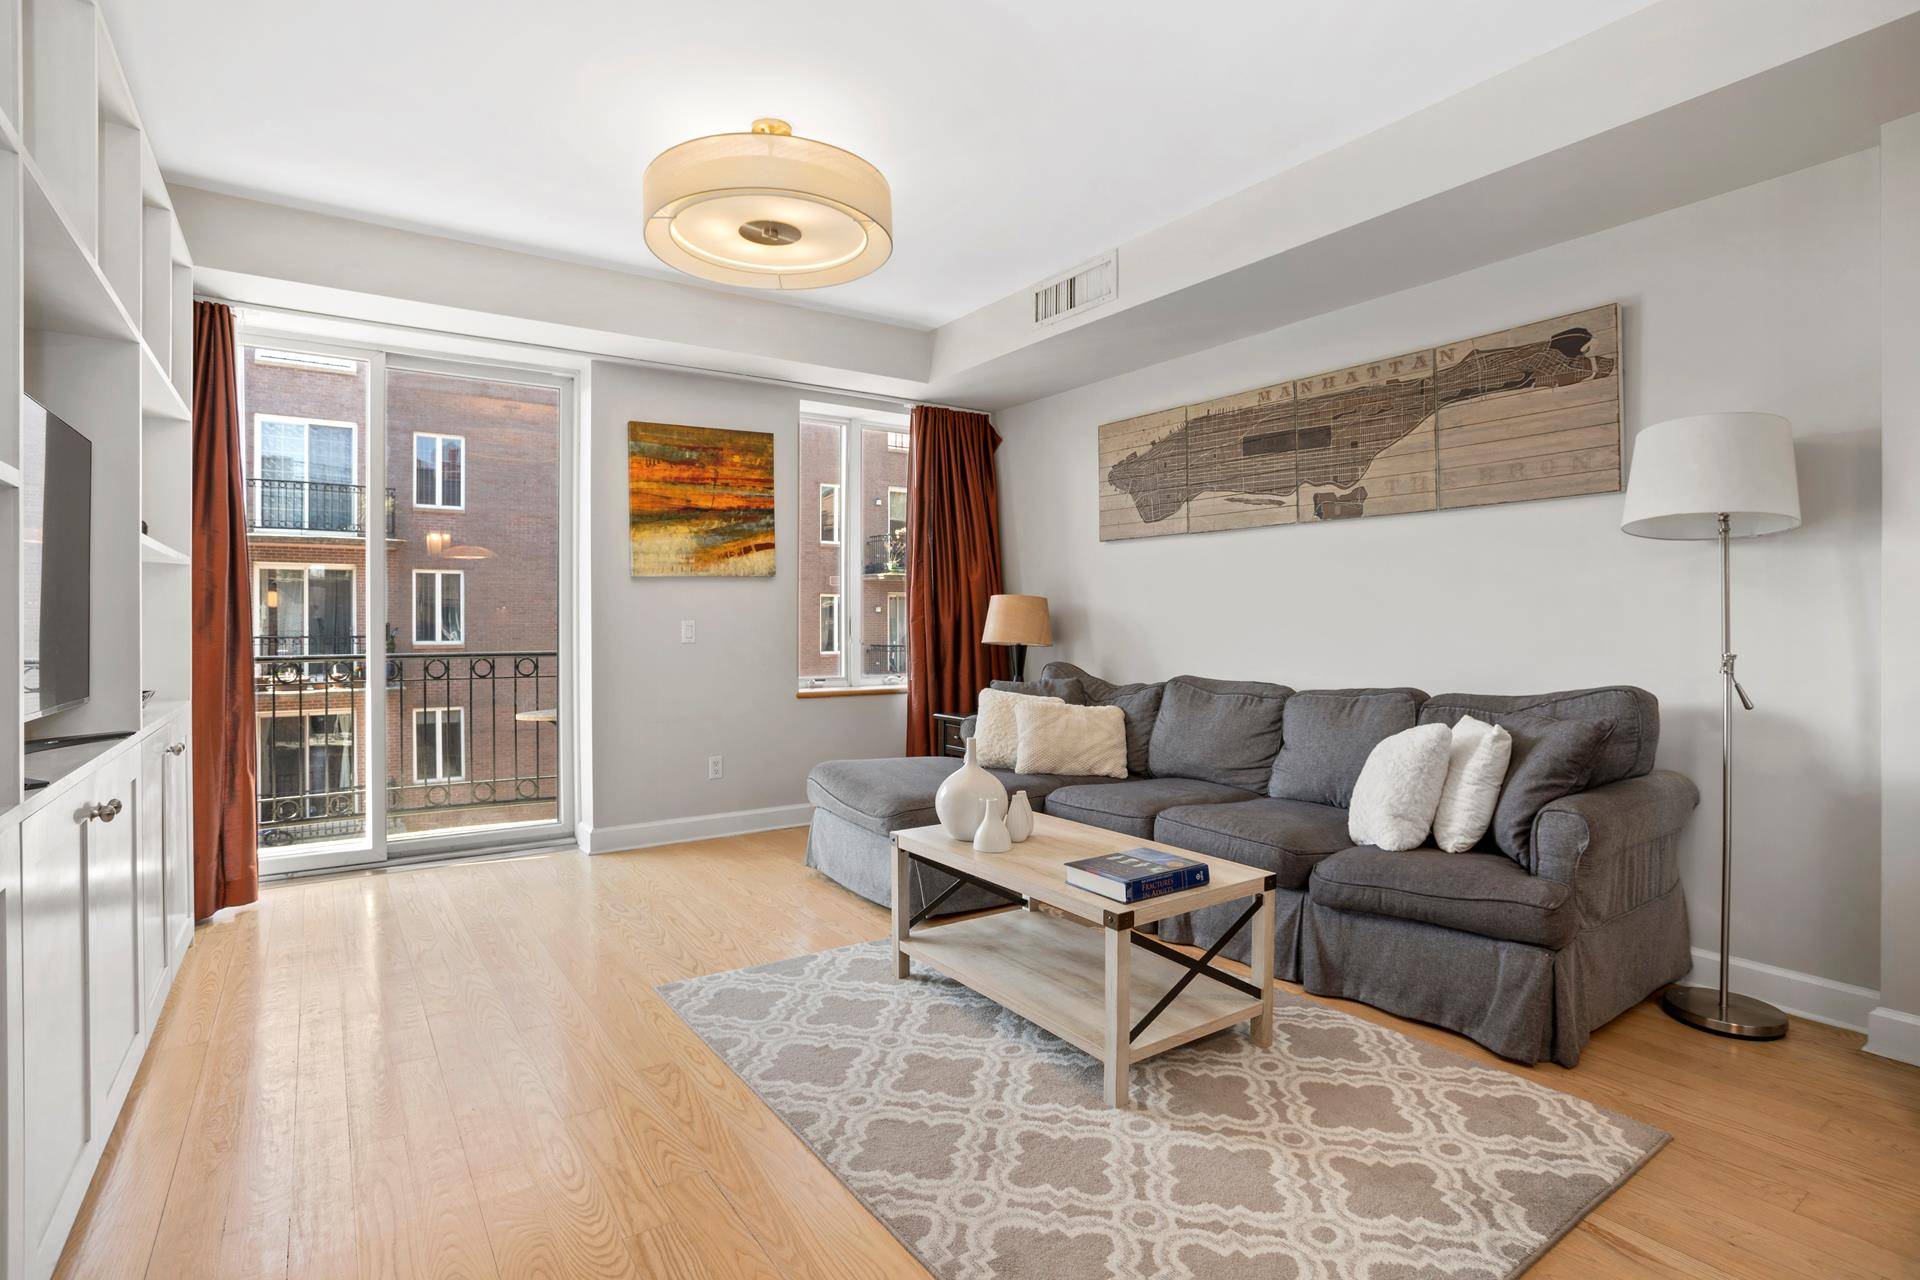 An exceptional value awaits you in Park Slope !